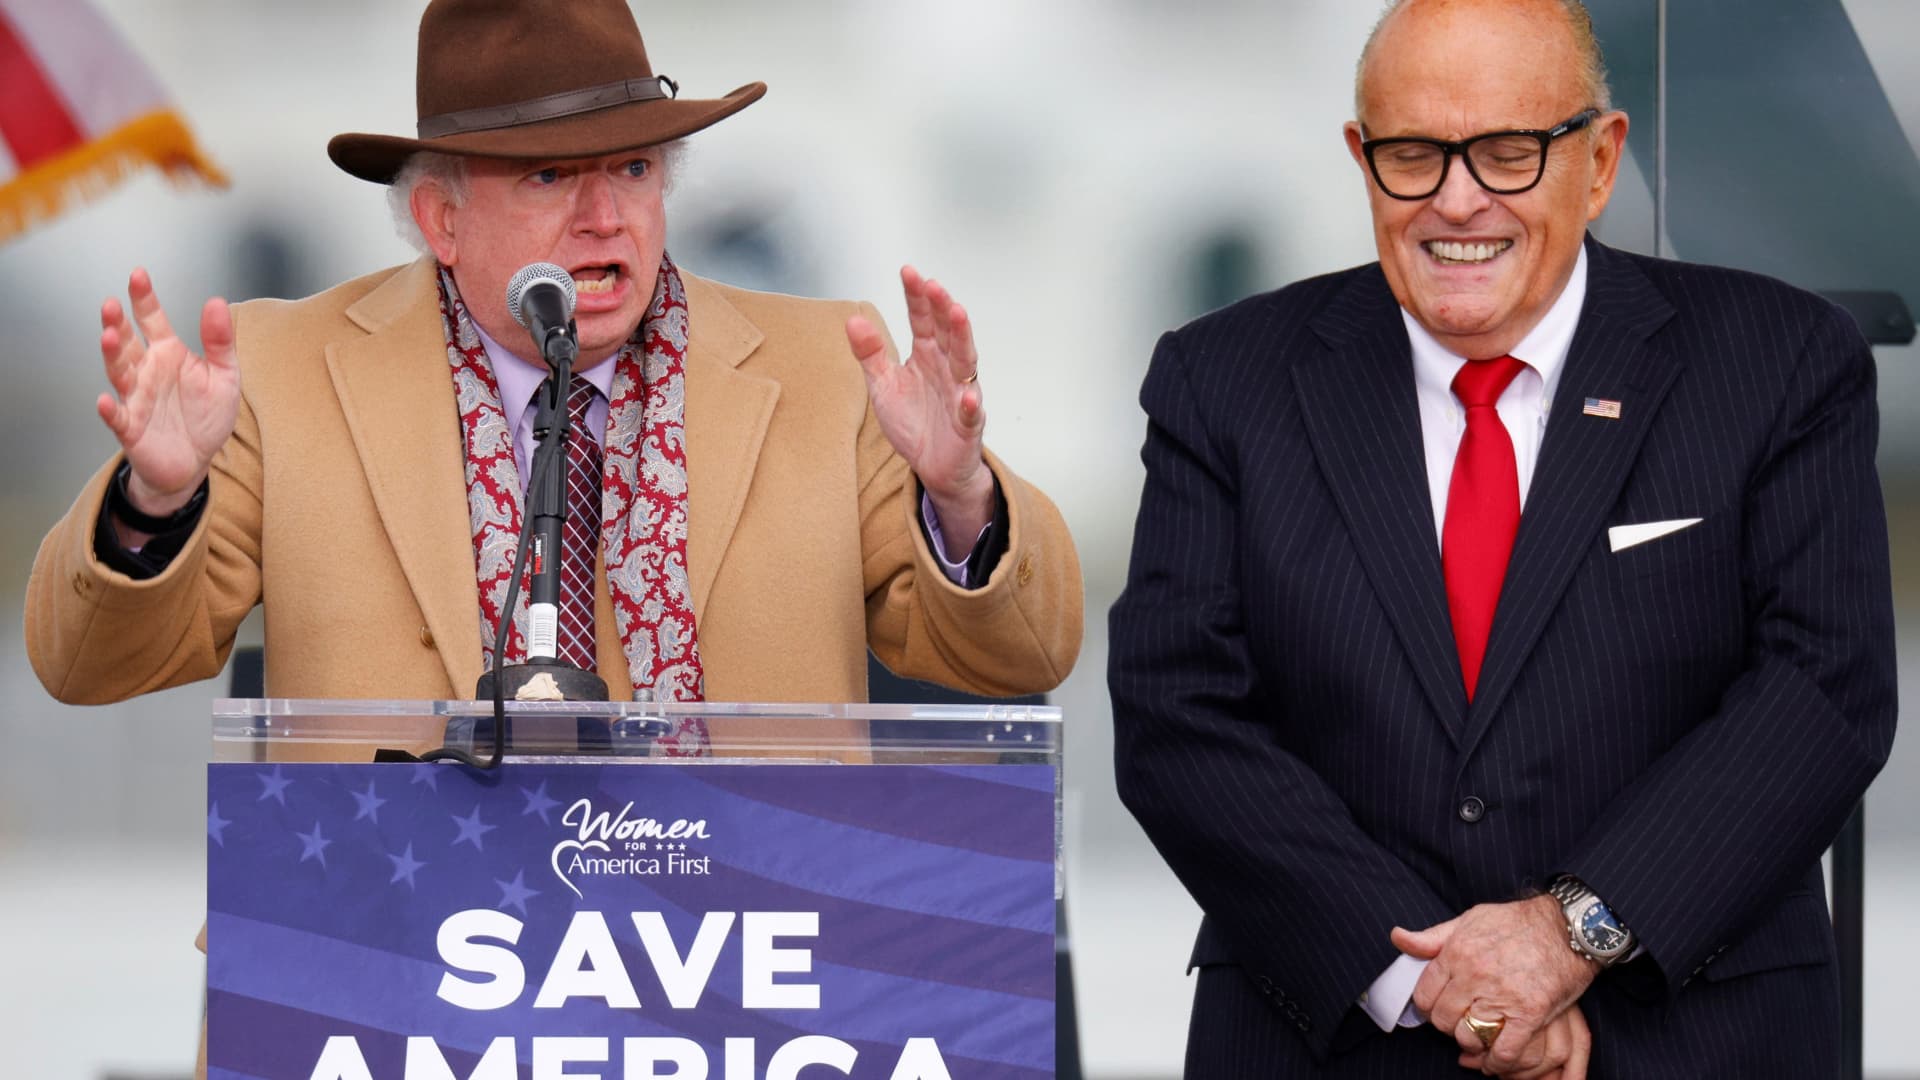 Attorney John Eastman gestures as he speaks next to U.S. President Donald Trump's personal attorney Rudy Giuliani, as Trump supporters gather ahead of the president’s speech to contest the certification by the U.S. Congress of the results of the 2020 U.S. presidential election on the Ellipse in Washington, January 6, 2021.